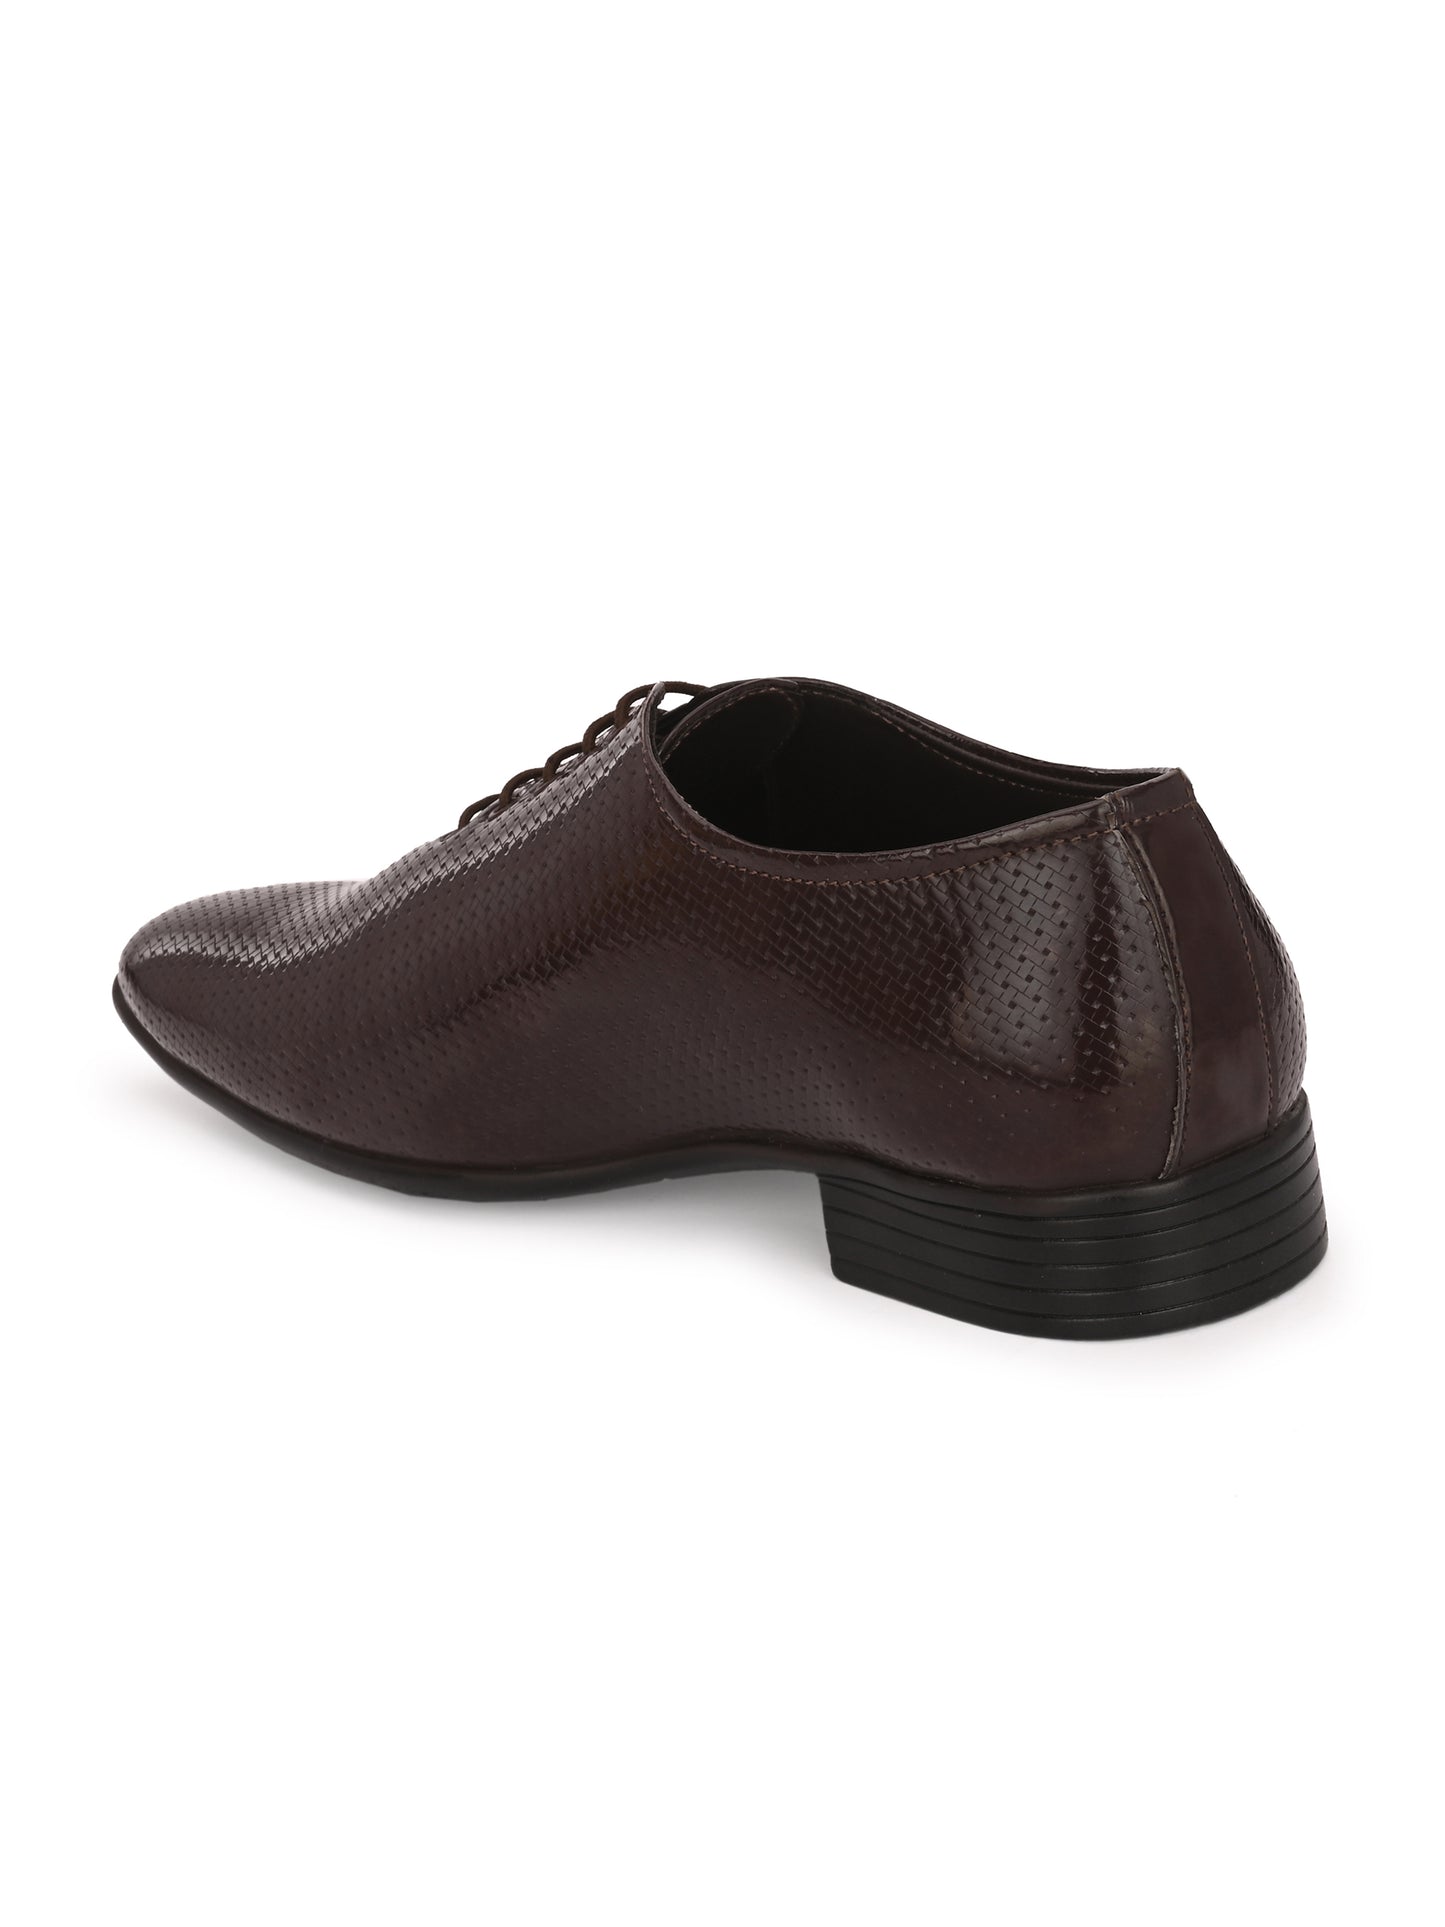 Guava Men's Brown Textured Onecut Lace Up Formal Shoes (GV15JA838)